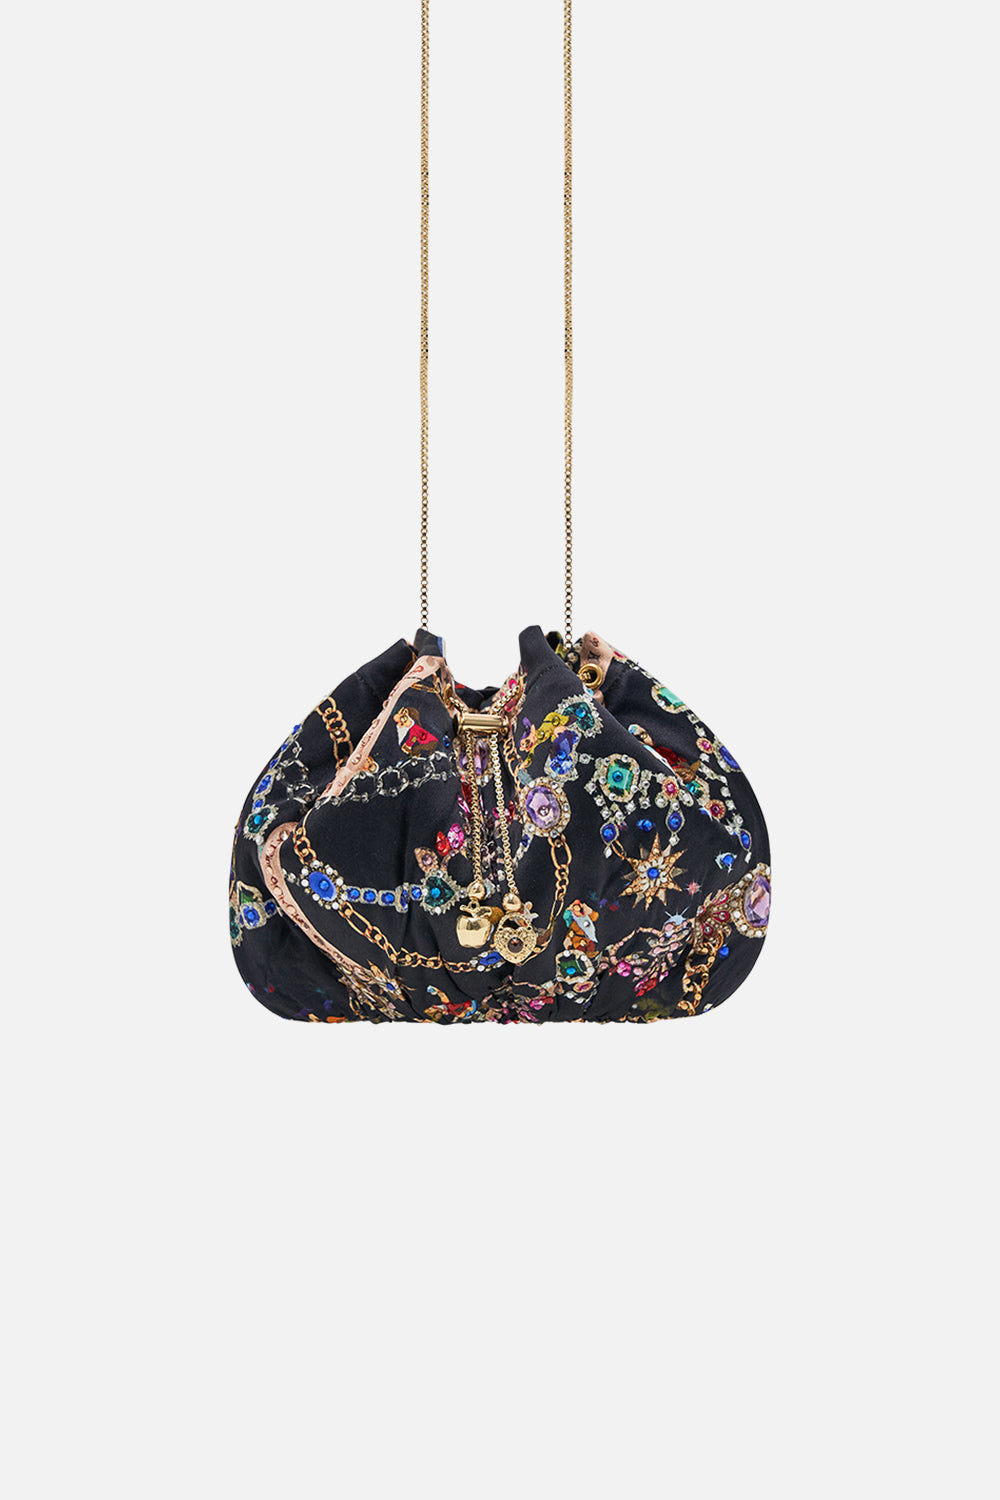 Disney CAMILLA drawstring pouch in Happily Ever After print